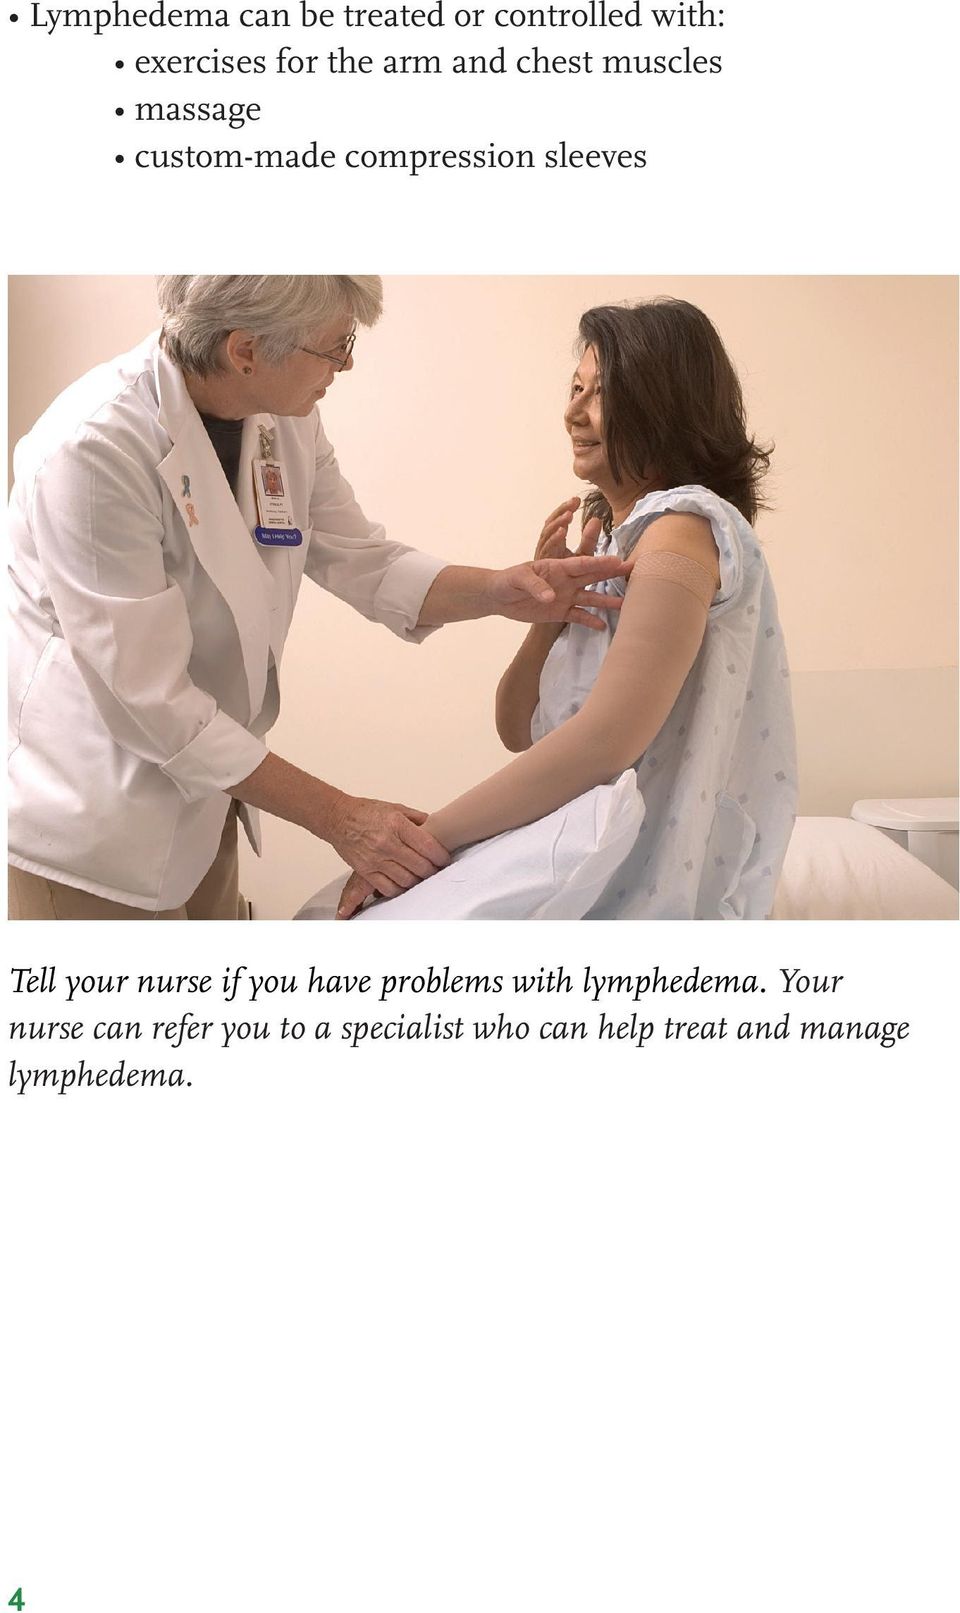 Tell your nurse if you have problems with lymphedema.